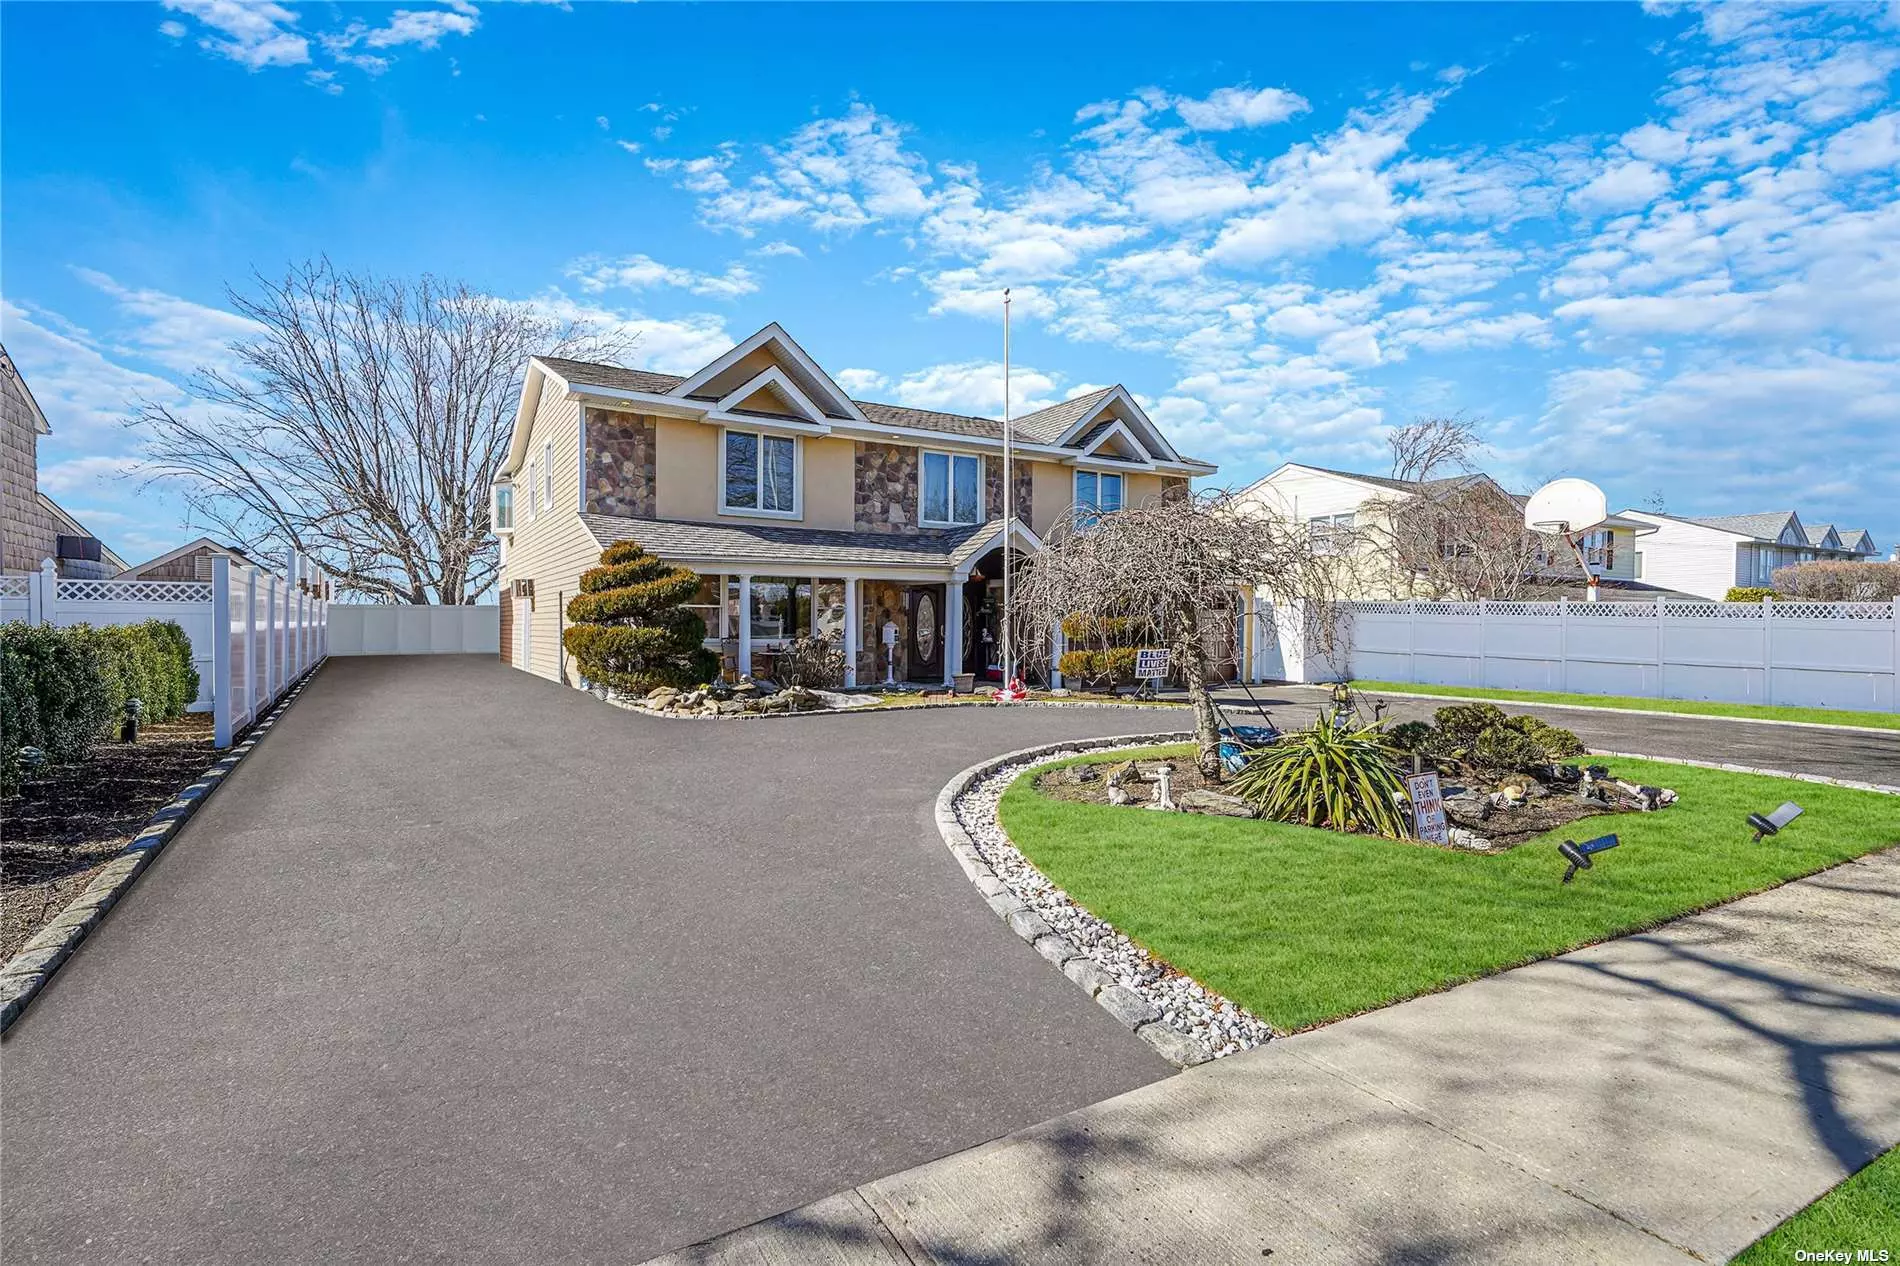 Gorgeous Mother/Daughter with proper permits in West Islip with in ground pool and pool house.